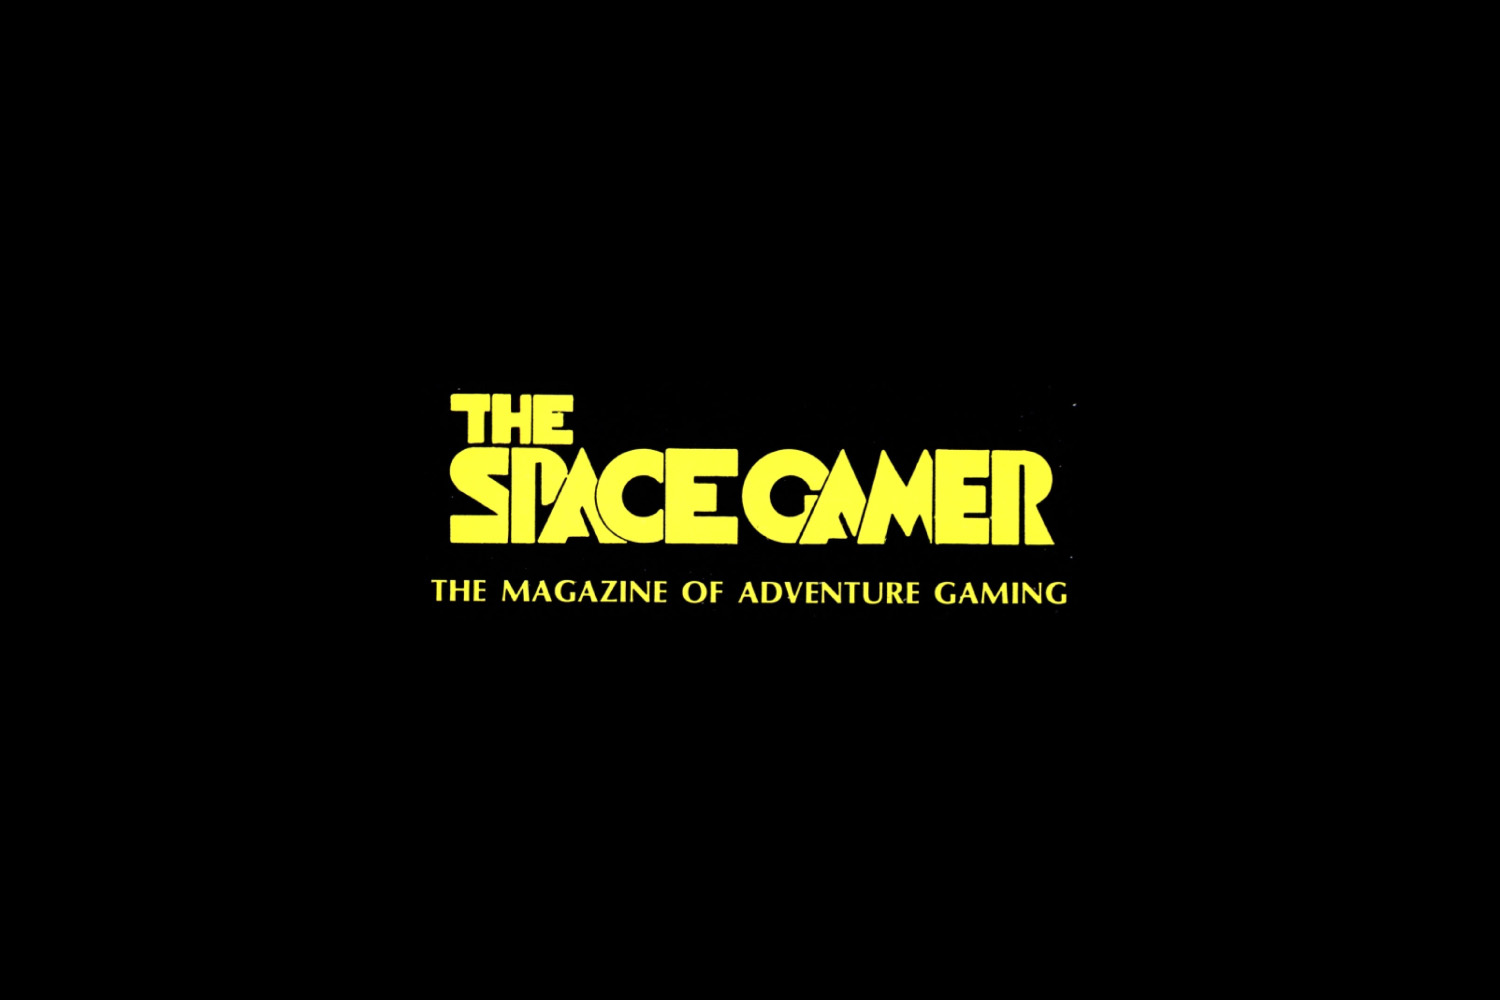 Old Space Gamer Articles